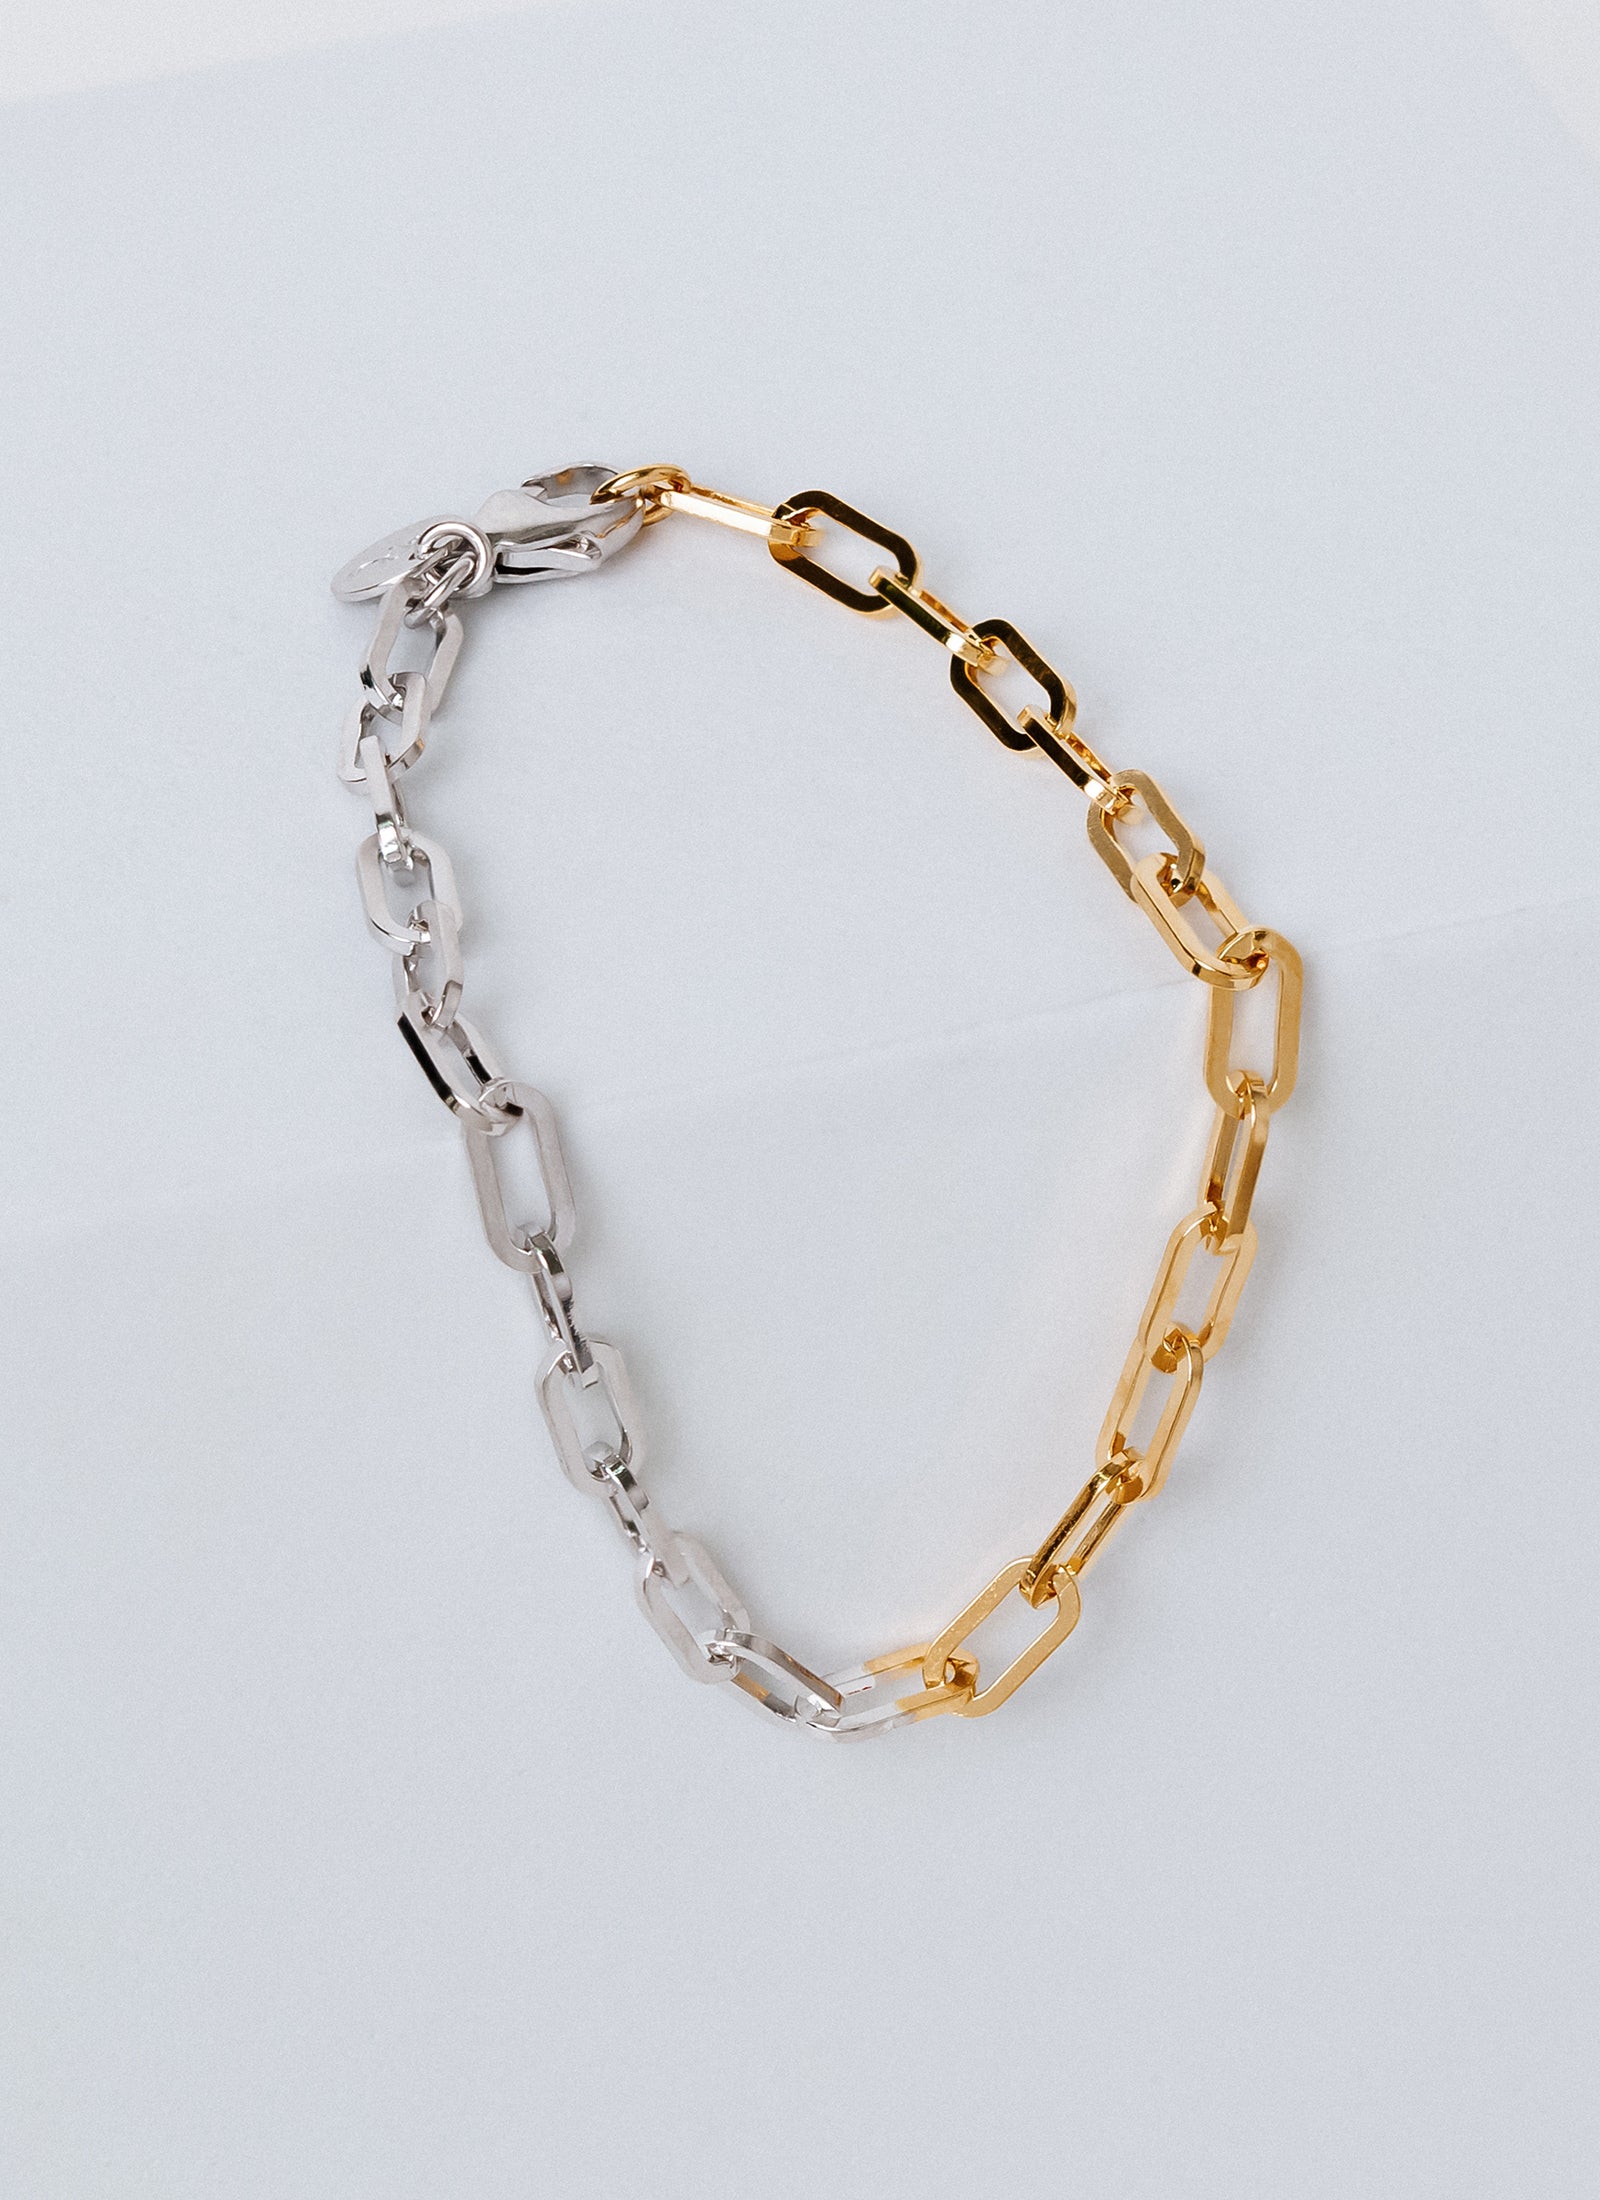 Two-Tone Wall Street Paper Clip Chain Bracelet from RIVA New York